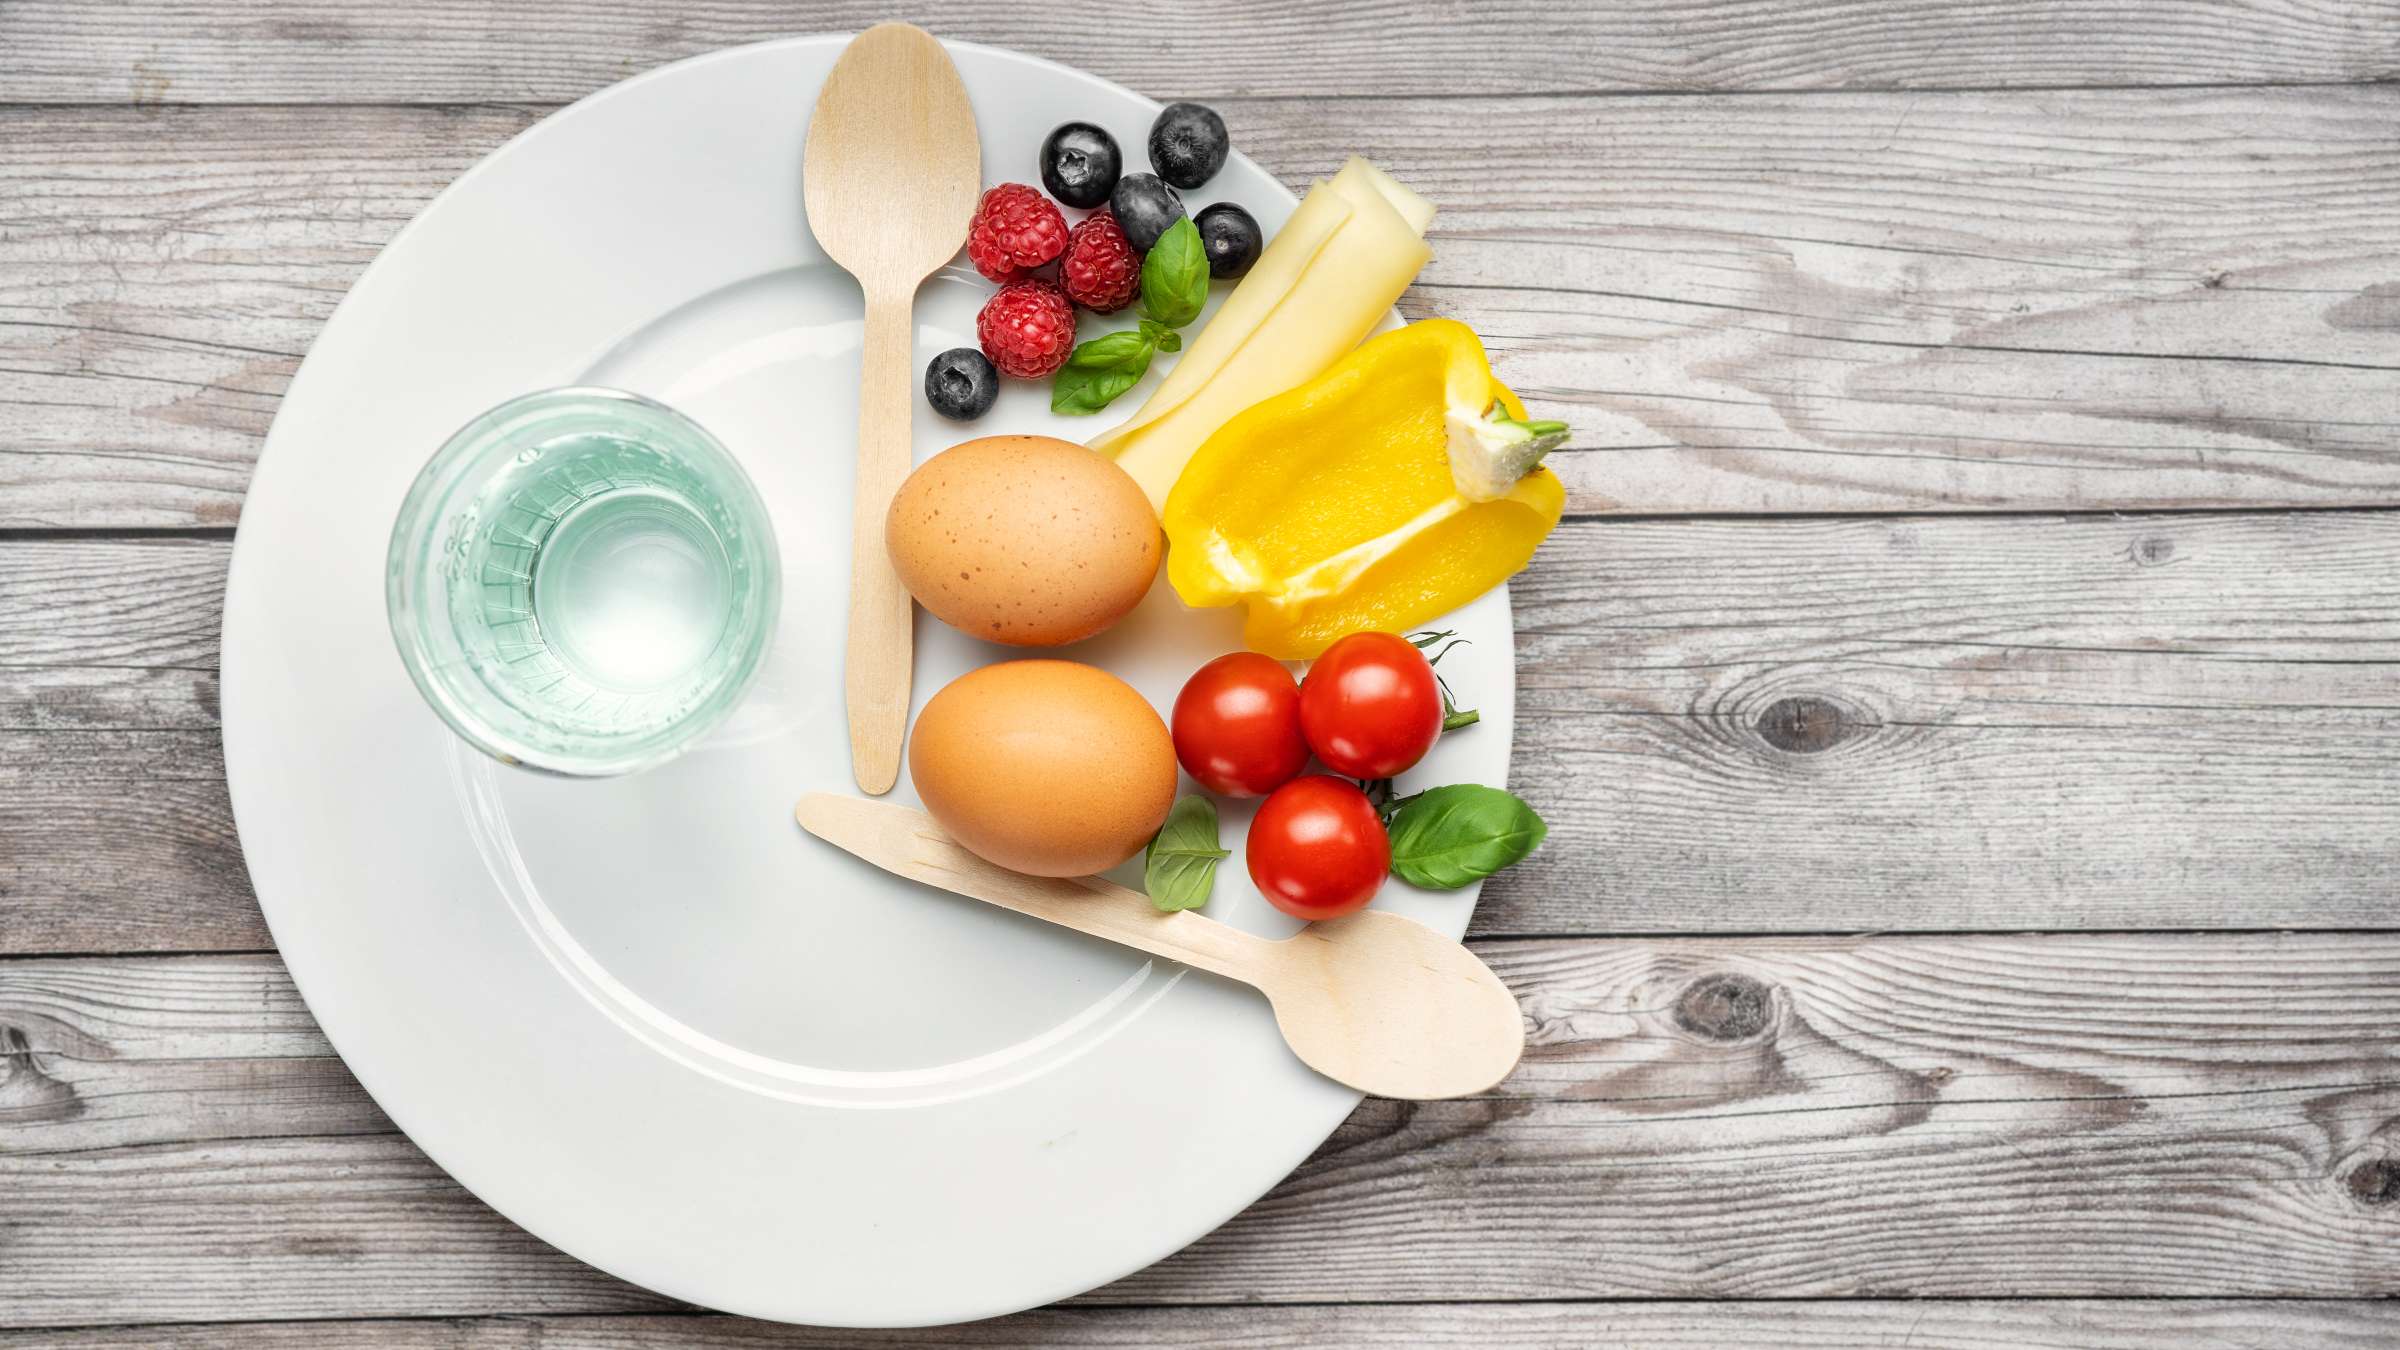 Intermittent Fasting: What is it, and how does it work?